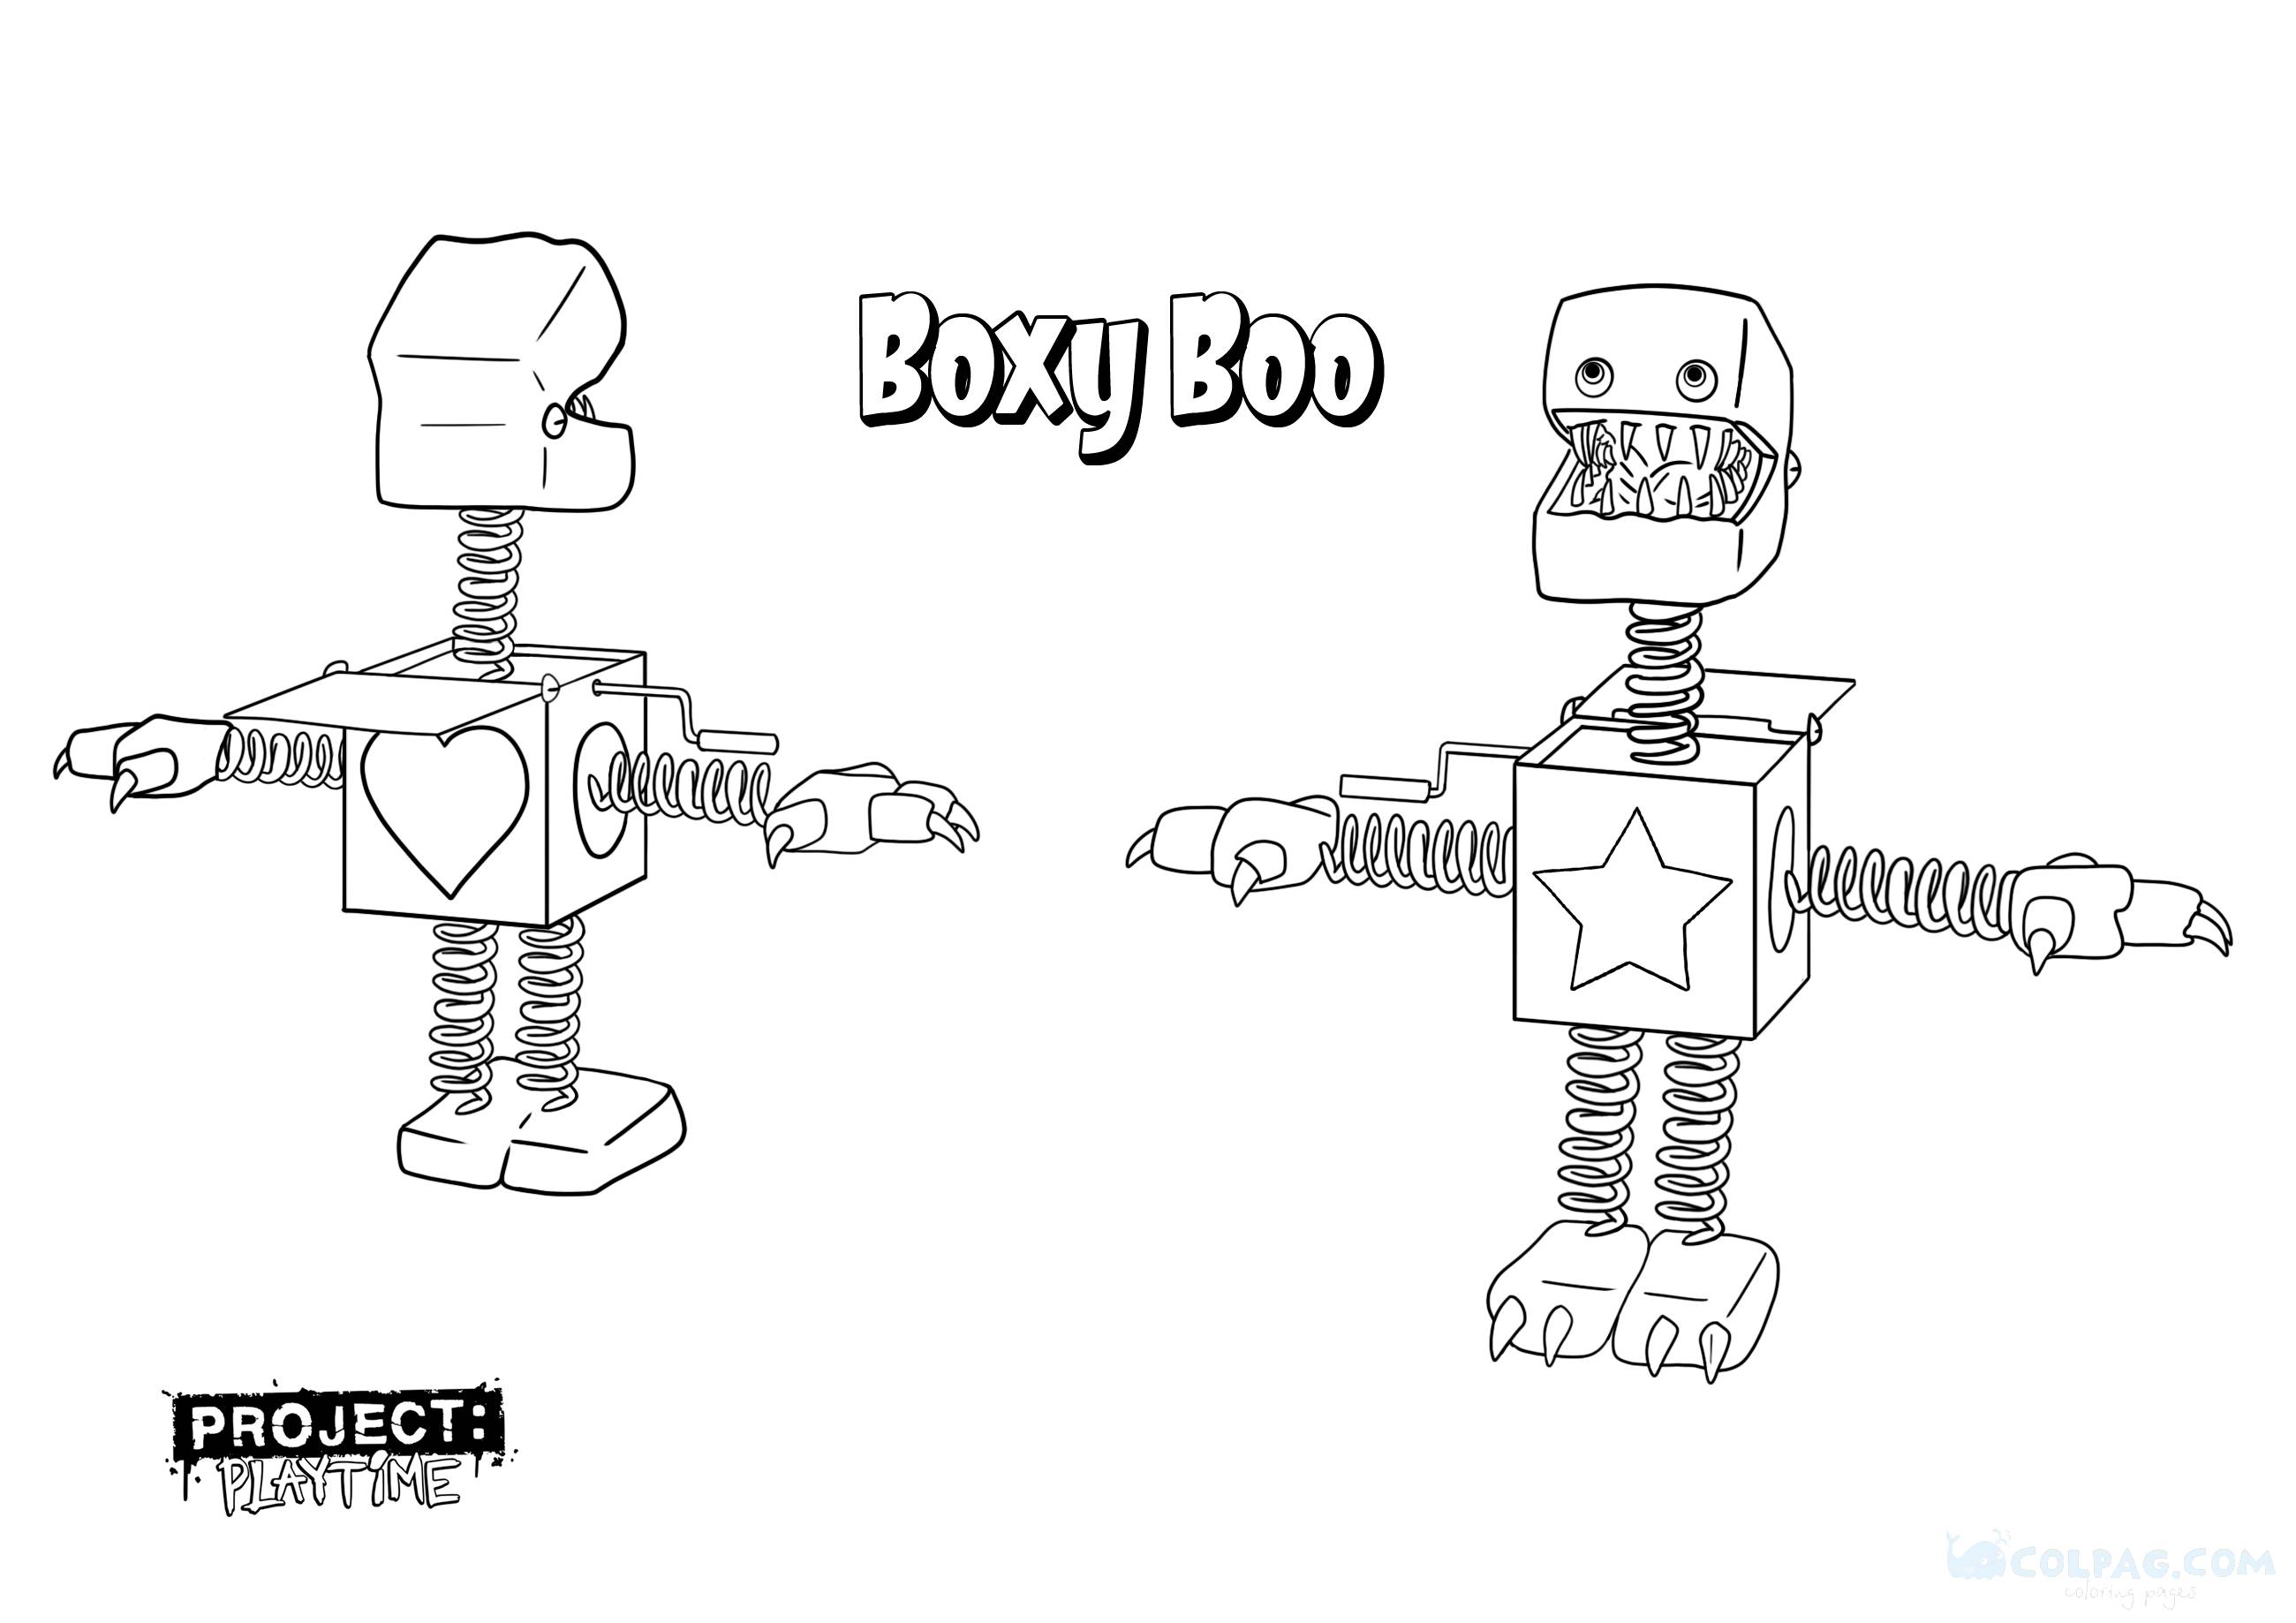 boxy-boo-project-playtime-coloring-page-colpag-com-20